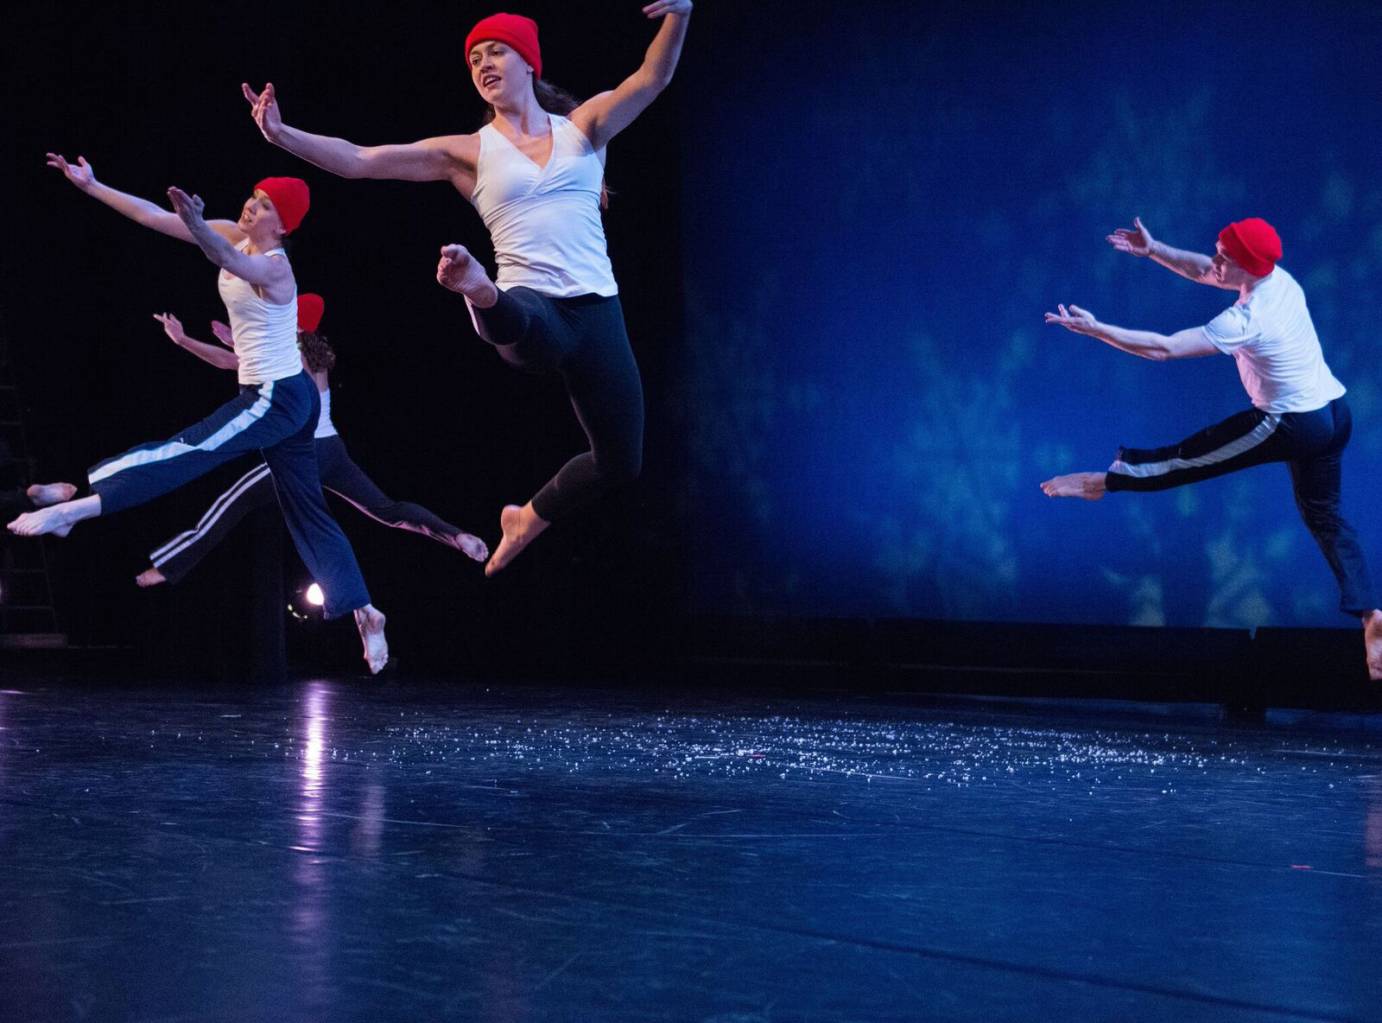 Dancers in red beanies leap